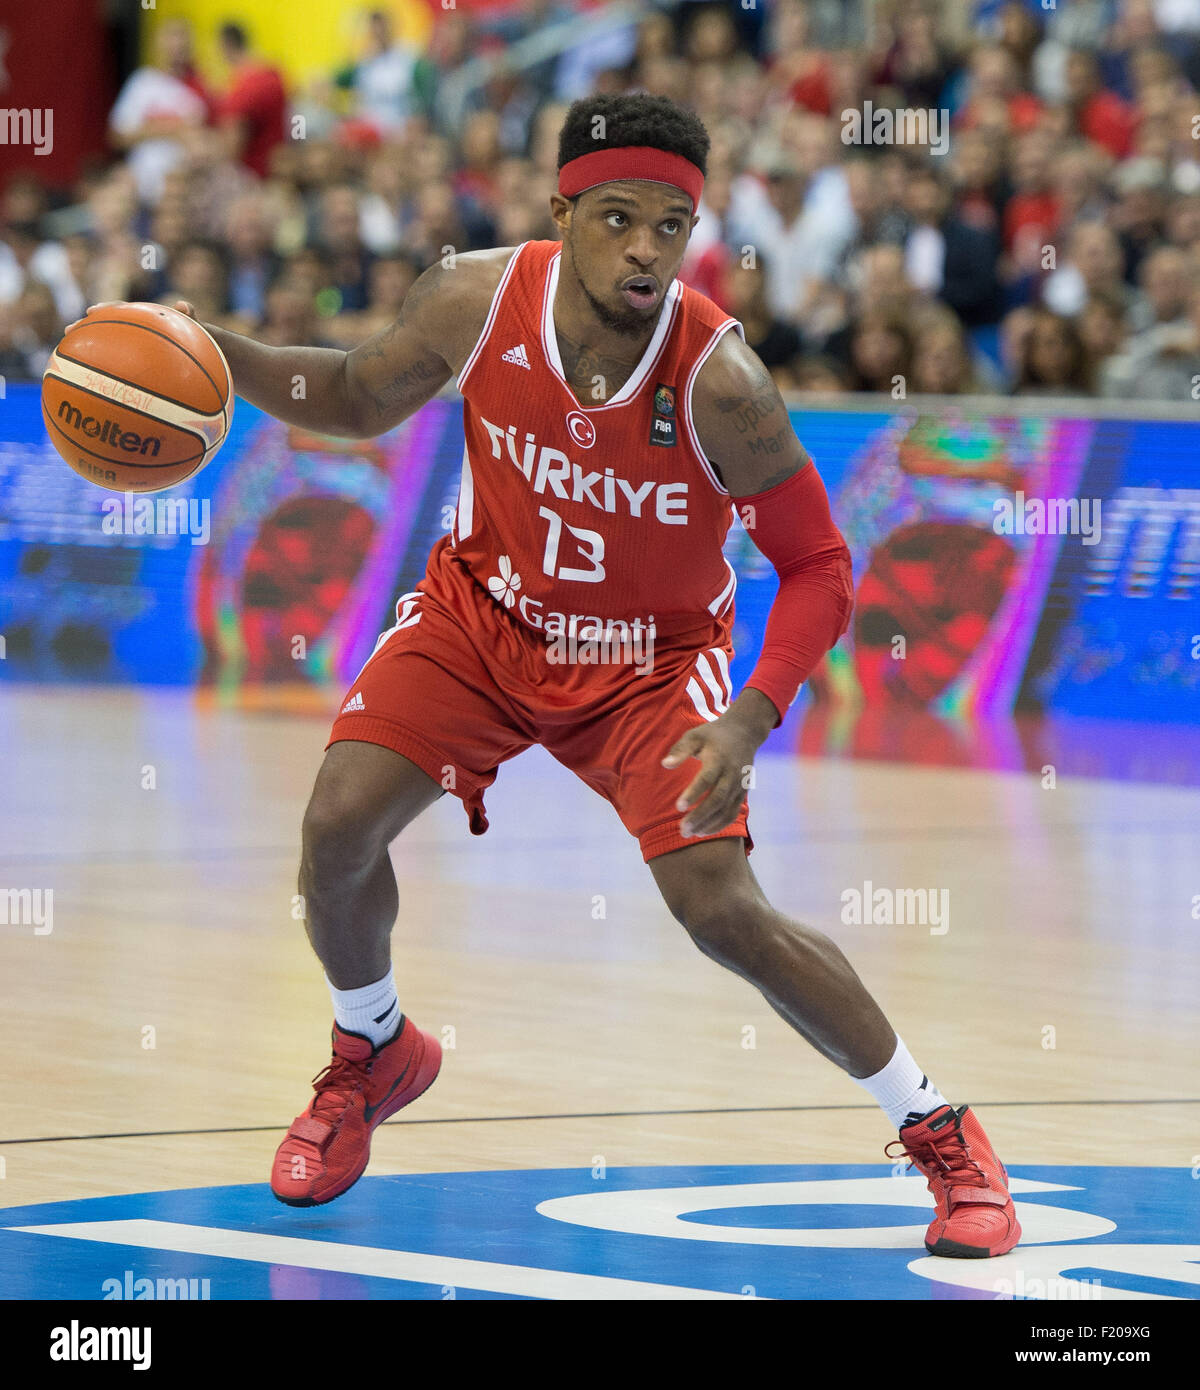 Berlin, Germany. 08th Sep, 2015. Turkey's Ali Muhammed dribbles the ball during the FIBA EuroBasket 2015 Group B match between Germany and Turkey, at the Mercedes-Benz-Arena in Berlin, Germany, 08 September 2015. Germany lost 75:80. Photo: Lukas Schulze/dpa/Alamy Live News Stock Photo